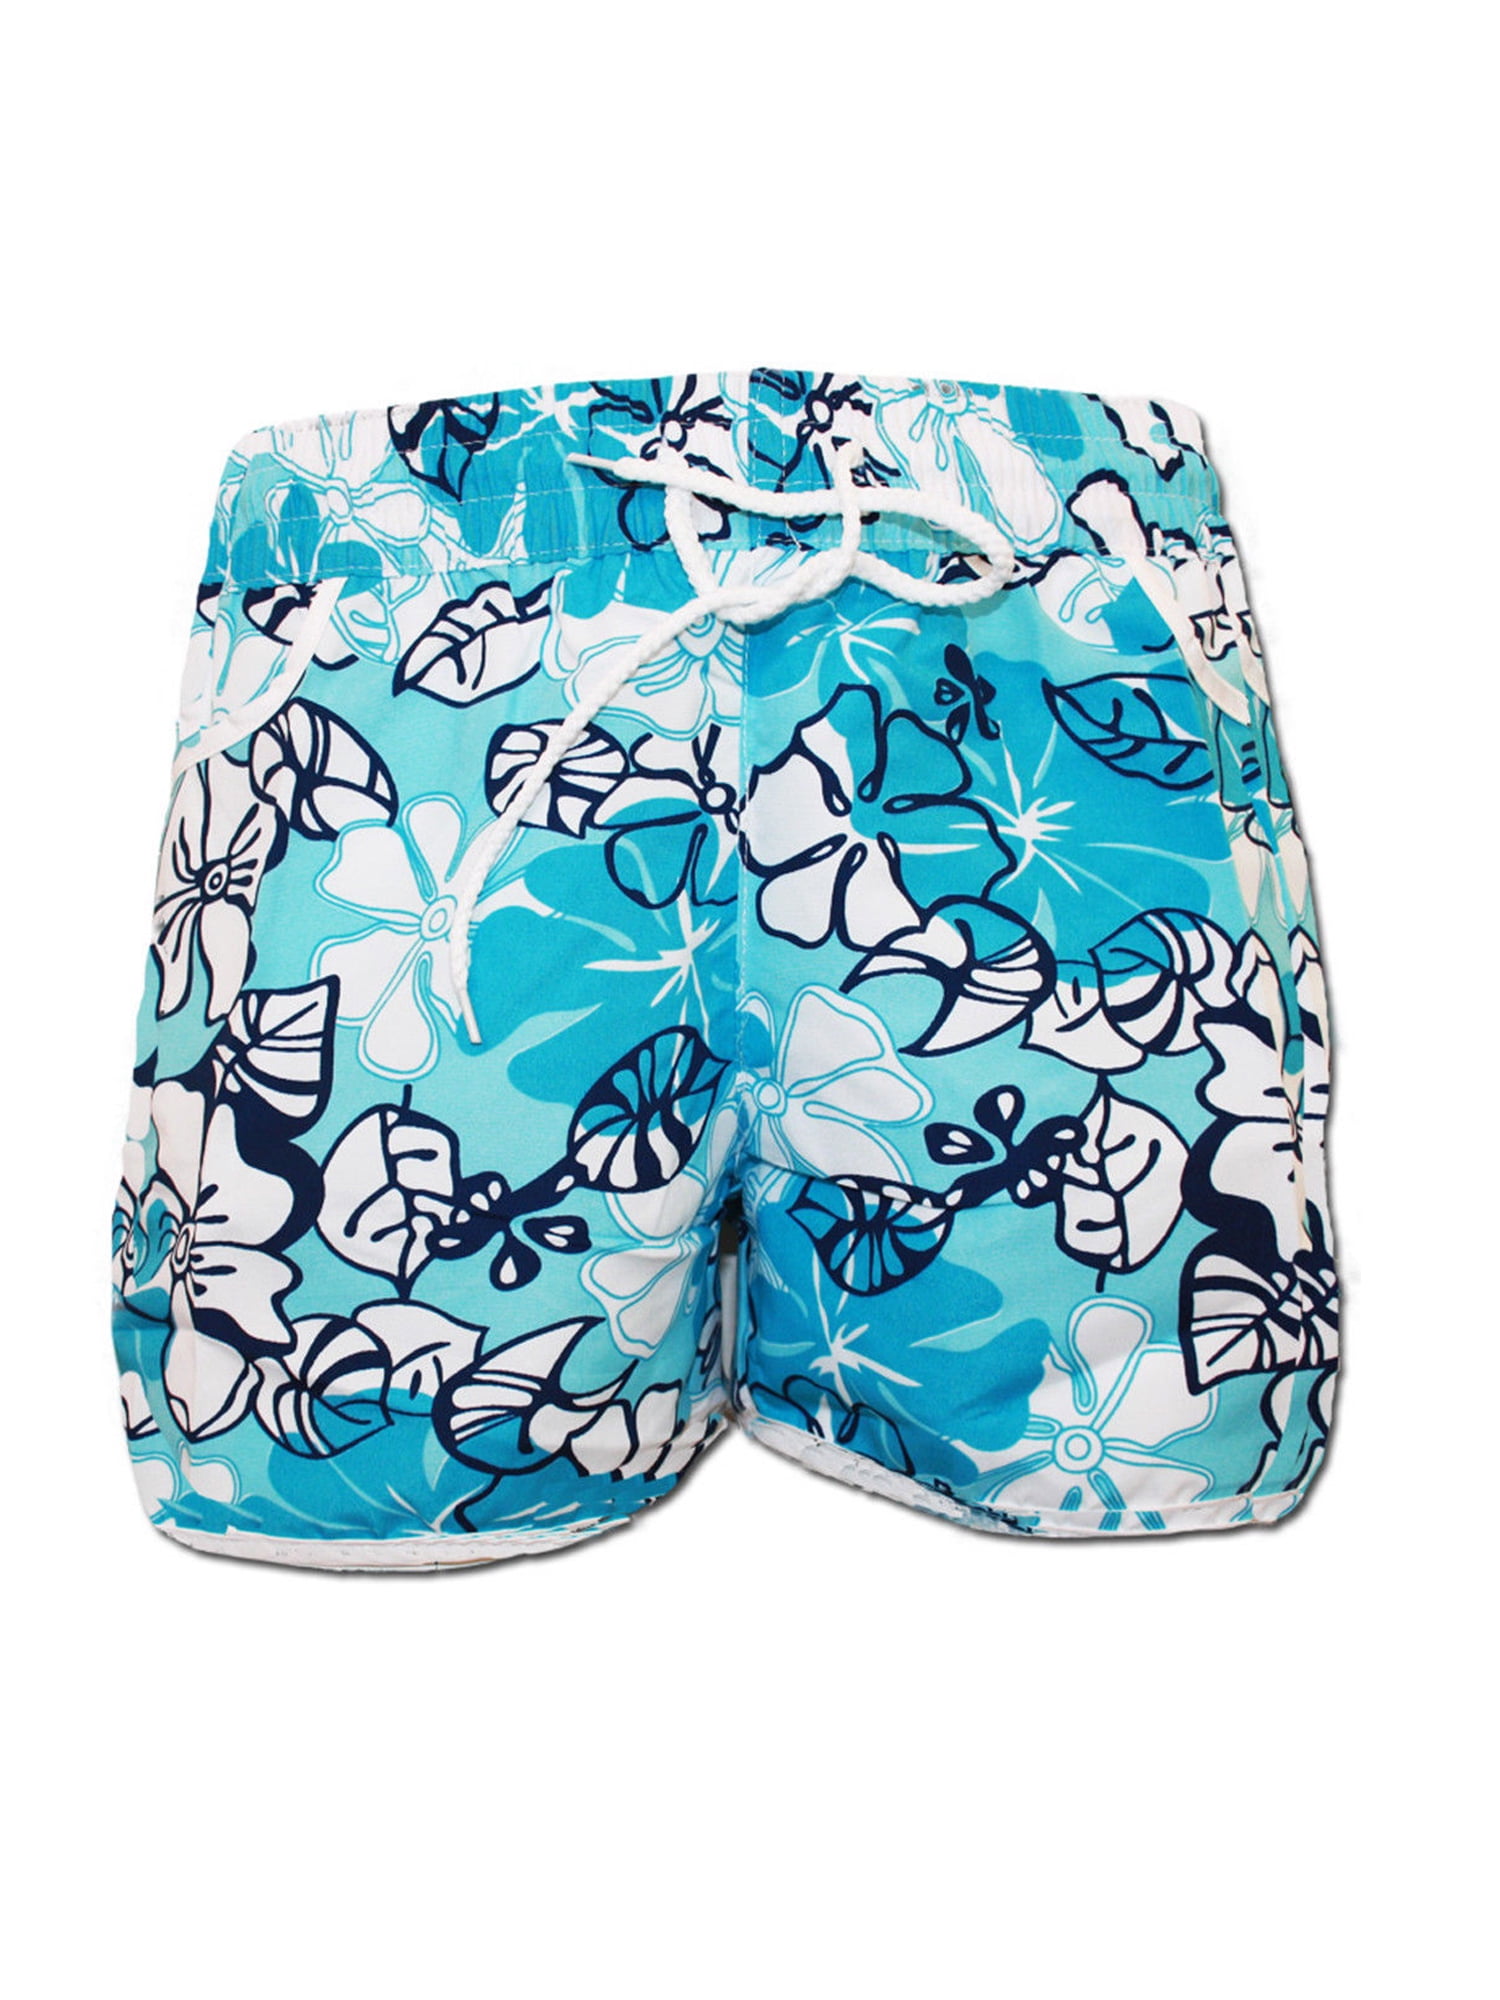 Casual Womens Swim Trunks Breathable Quick Dry Printed Beach Shorts Animal Concert Summer Boardshorts with Mesh Lining 